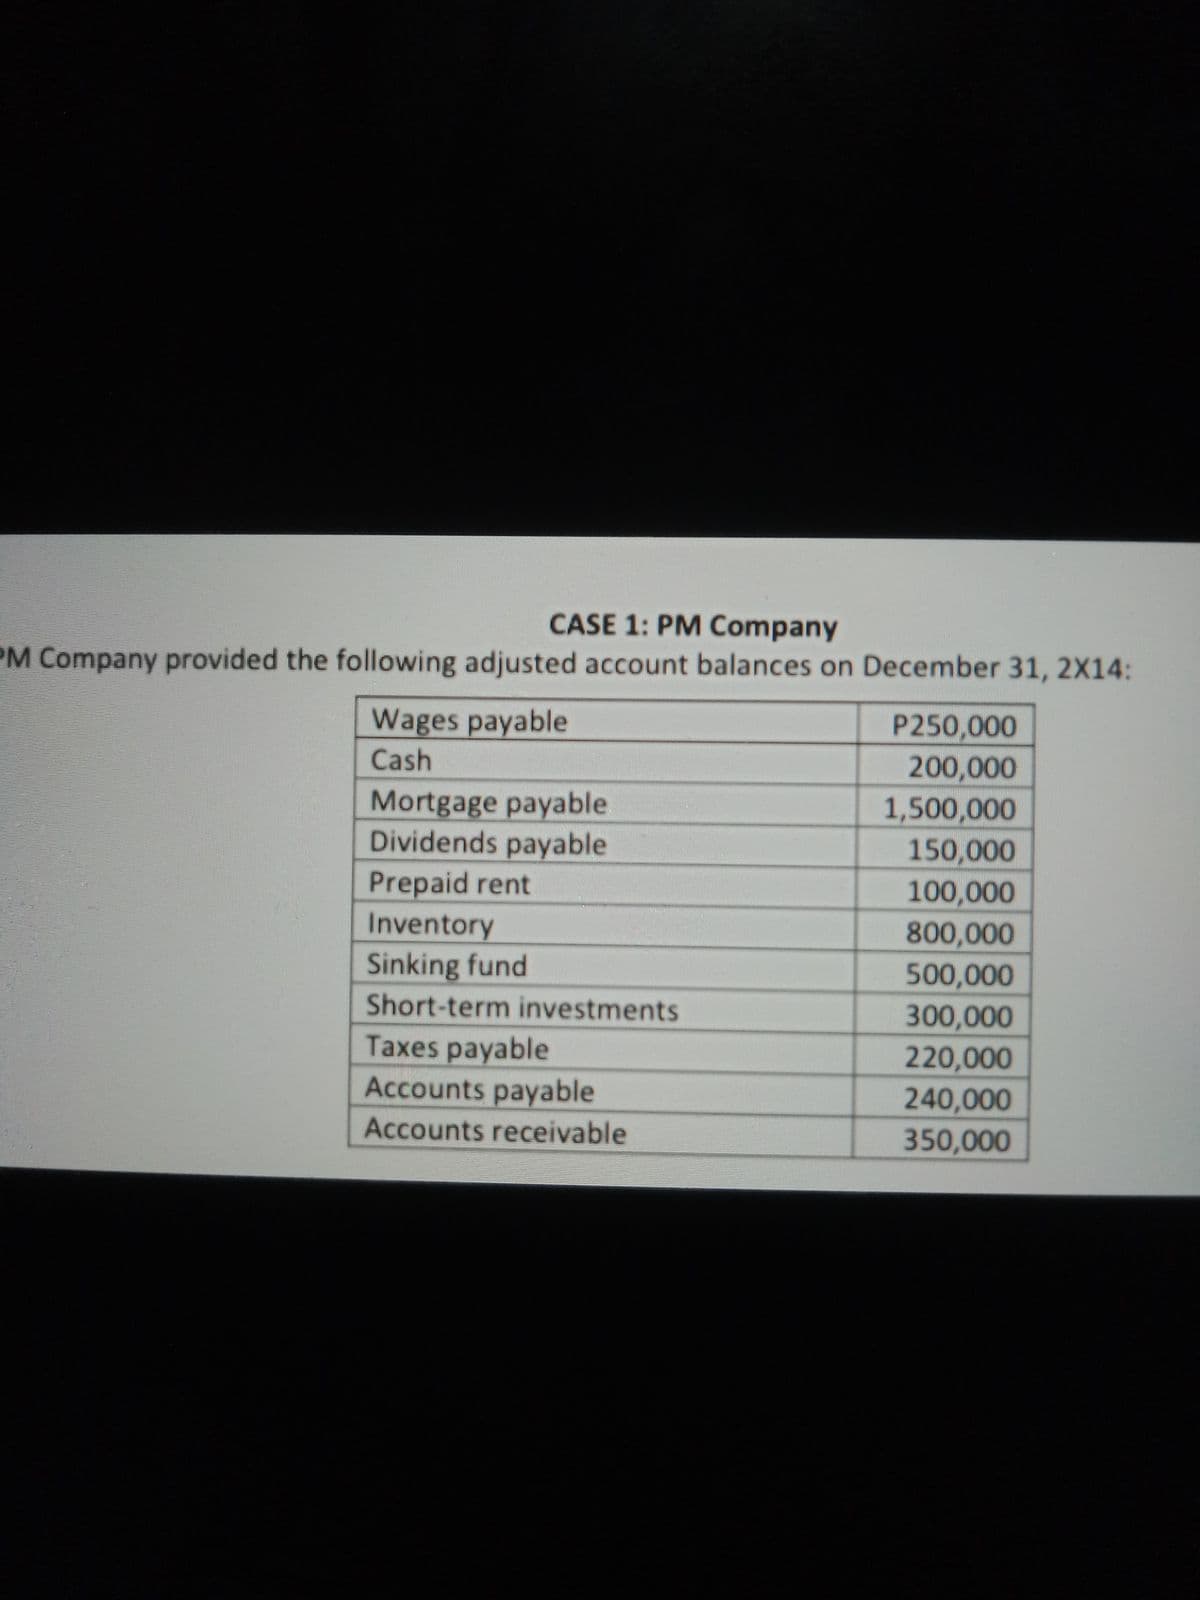 CASE 1: PM Company
M Company provided the following adjusted account balances on December 31, 2X14:
Wages payable
P250,000
Cash
200,000
Mortgage payable
Dividends payable
1,500,000
150,000
100,000
Prepaid rent
Inventory
Sinking fund
800,000
500,000
Short-term investments
300,000
Taxes payable
Accounts payable
220,000
240,000
Accounts receivable
350,000
